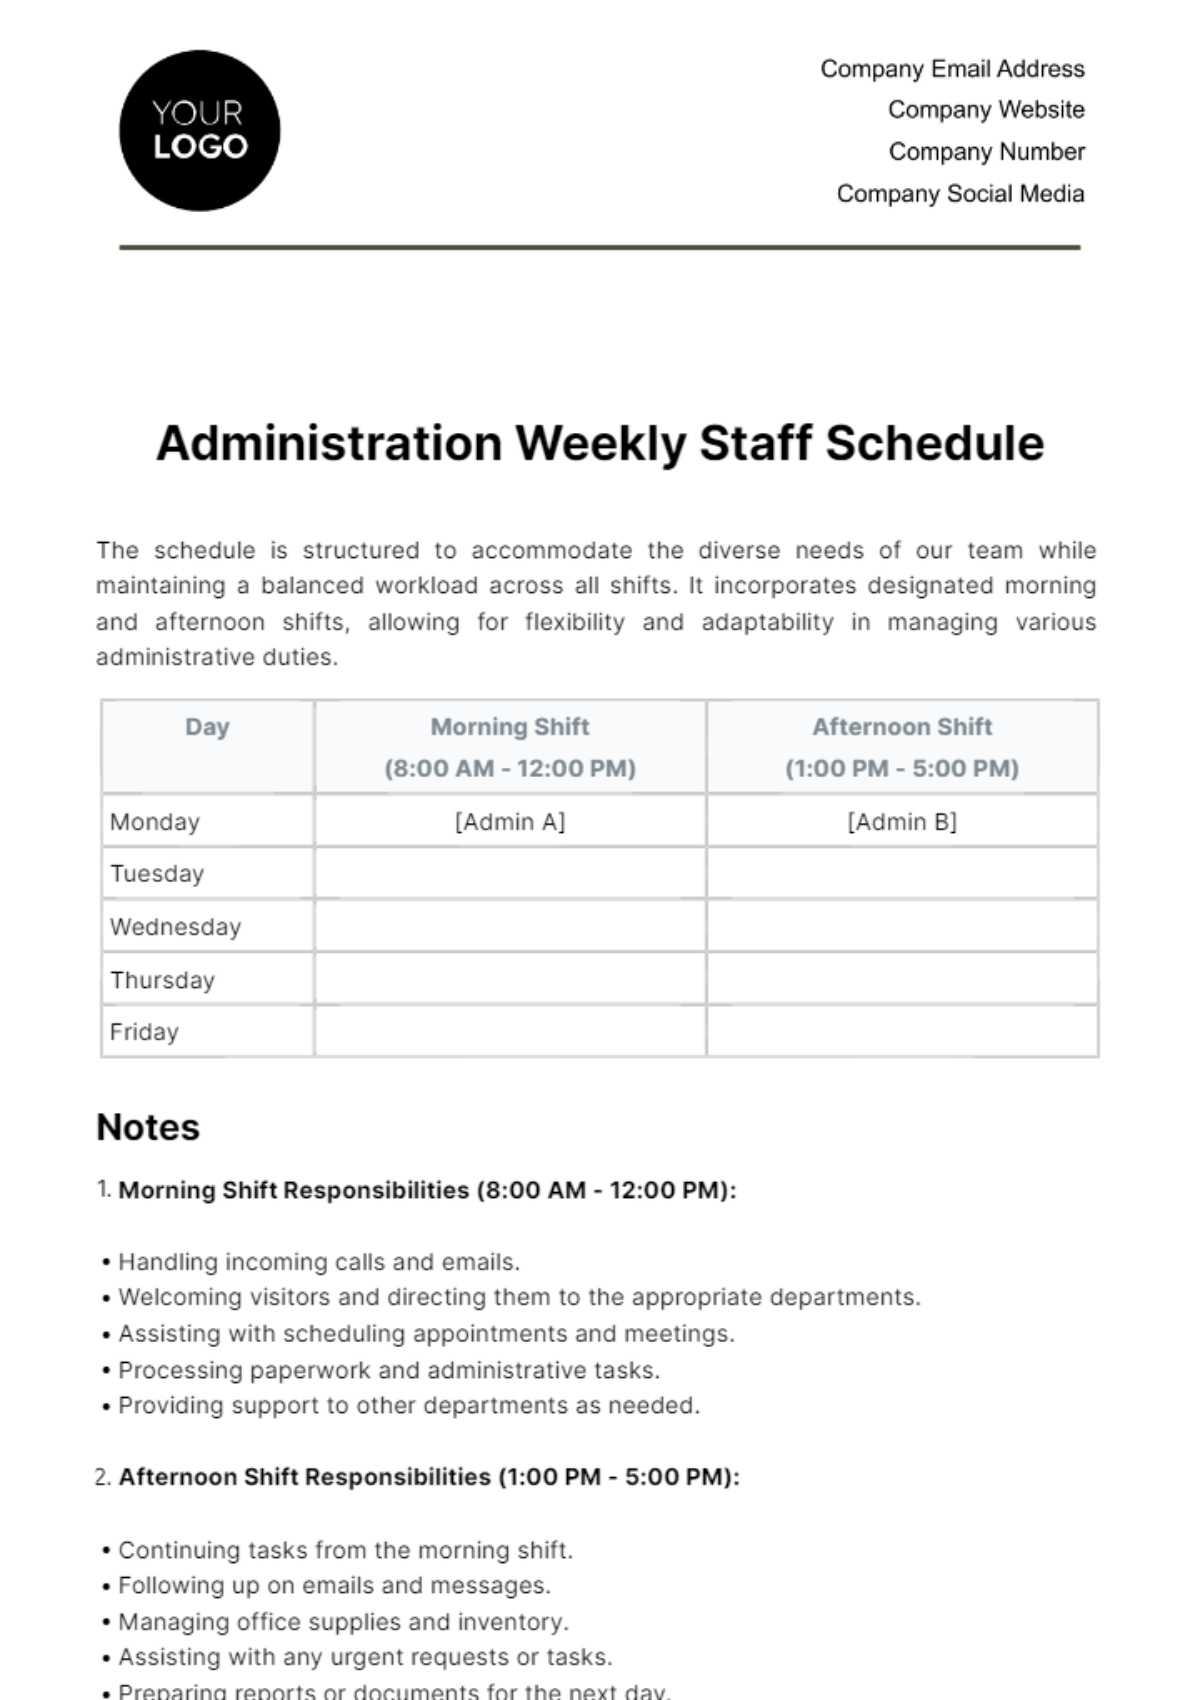 Free Administration Weekly Staff Schedule Template